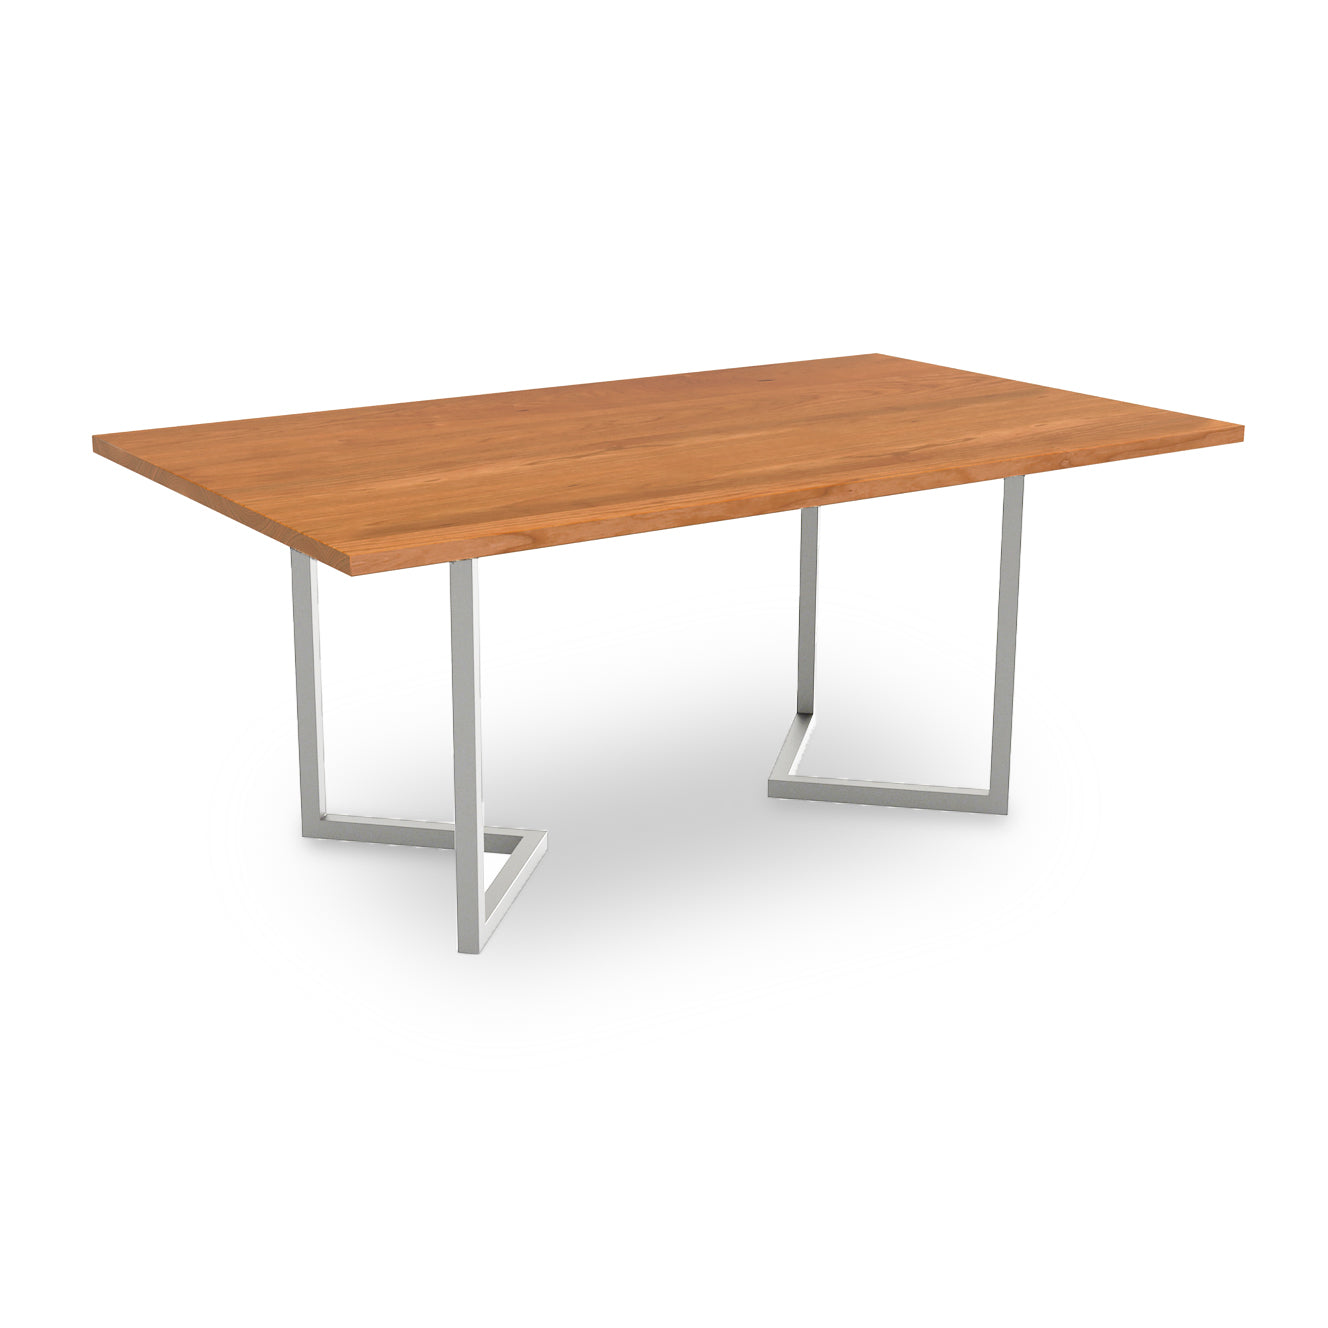 The Lyndon Furniture Vershire Solid Top Dining Table showcases a modern-industrial design, featuring sleek metal legs and a beautiful wooden top. Handmade to order, this dining table exudes contemporary style while